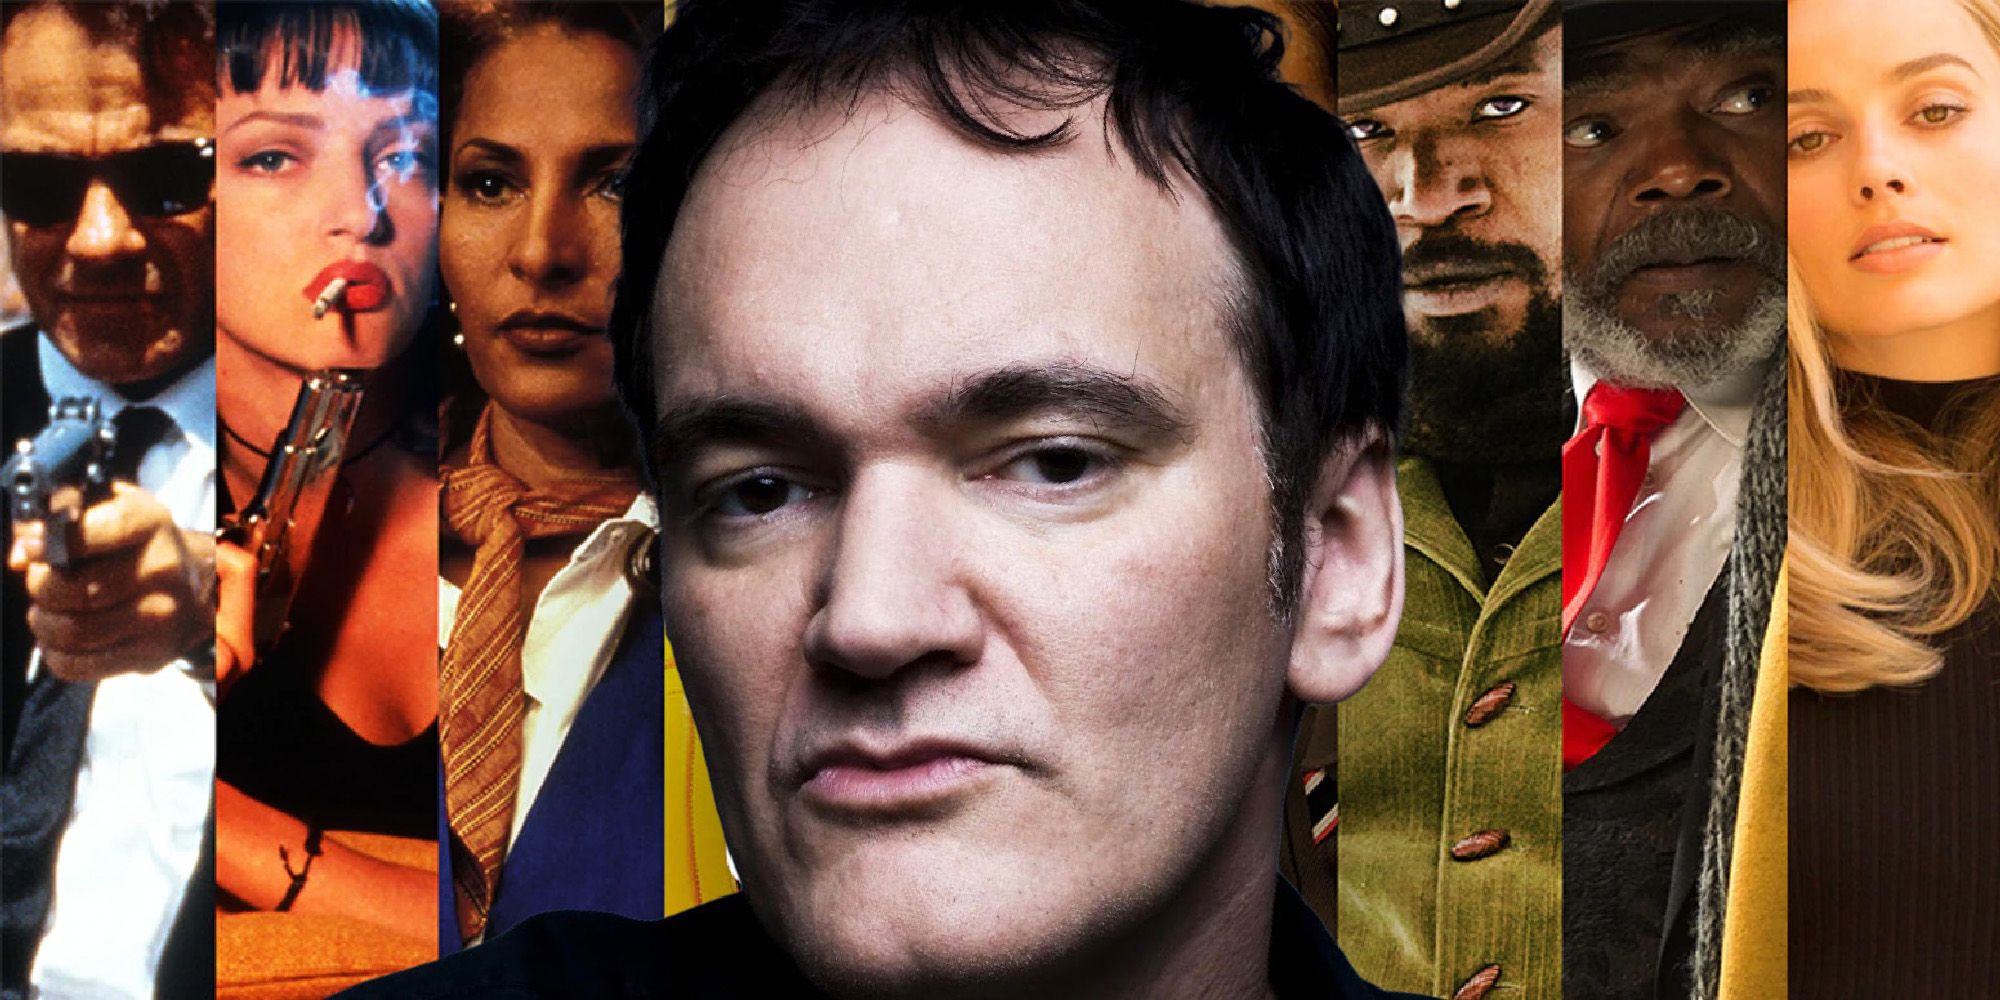 Quentin Tarantino in front of his various films